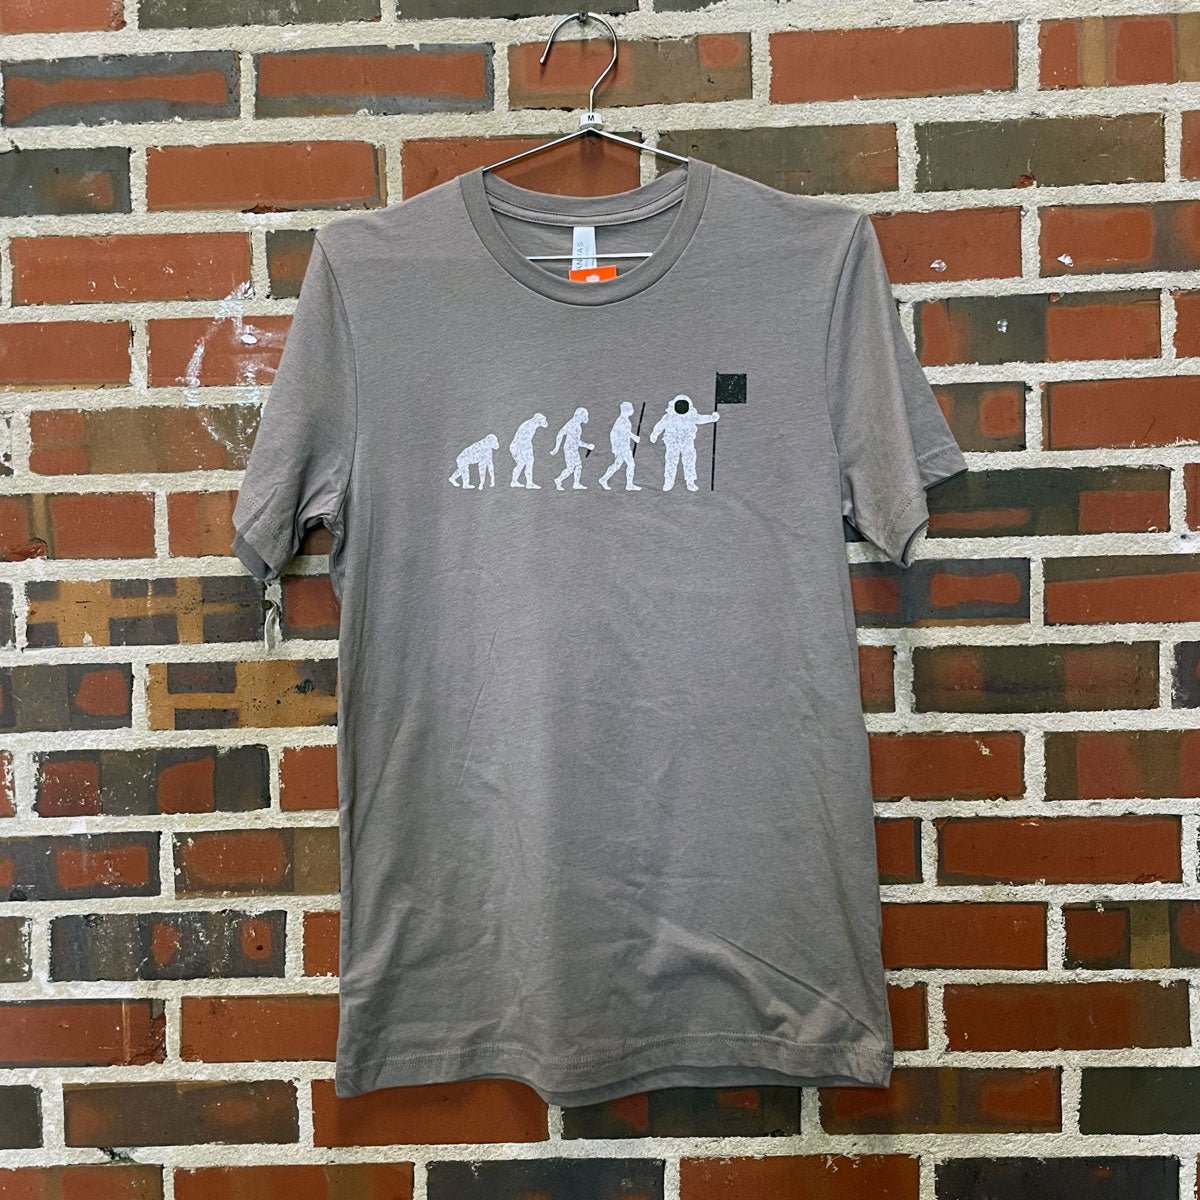 Image of evolution progression from ape to spaceman on grey t-shirt hanging against brick wall at Lowe Mill